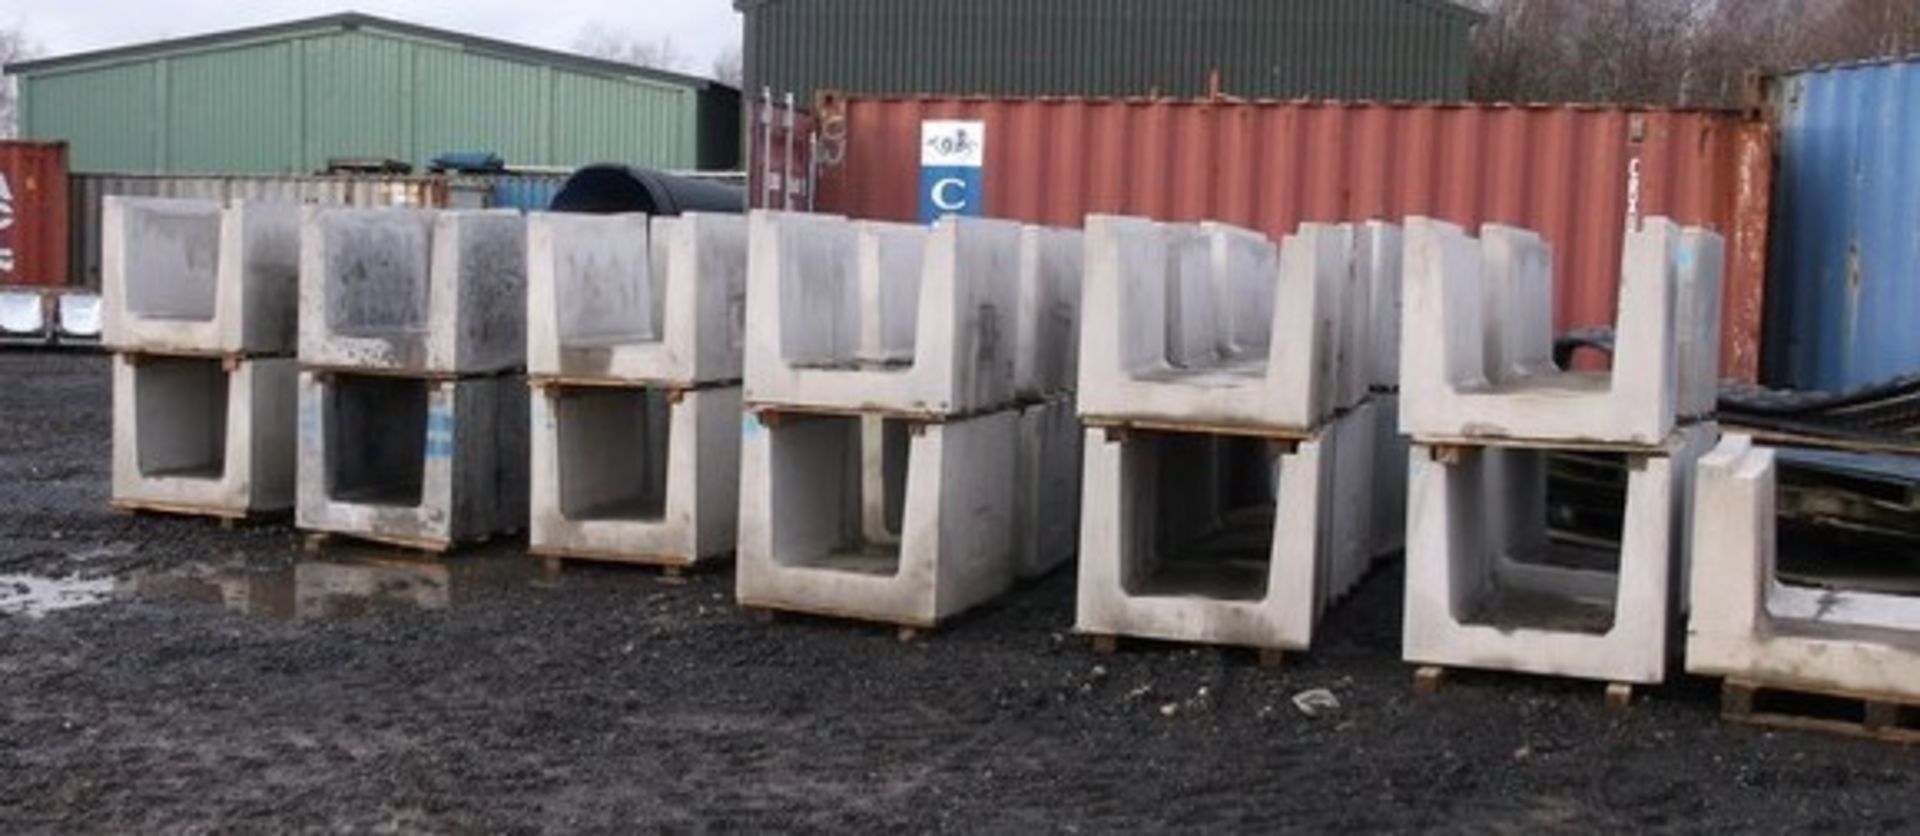 SELECTION OF EASI-DUCT CONCRETE CABLE TROUGHS (APPROX 36) - Image 3 of 5